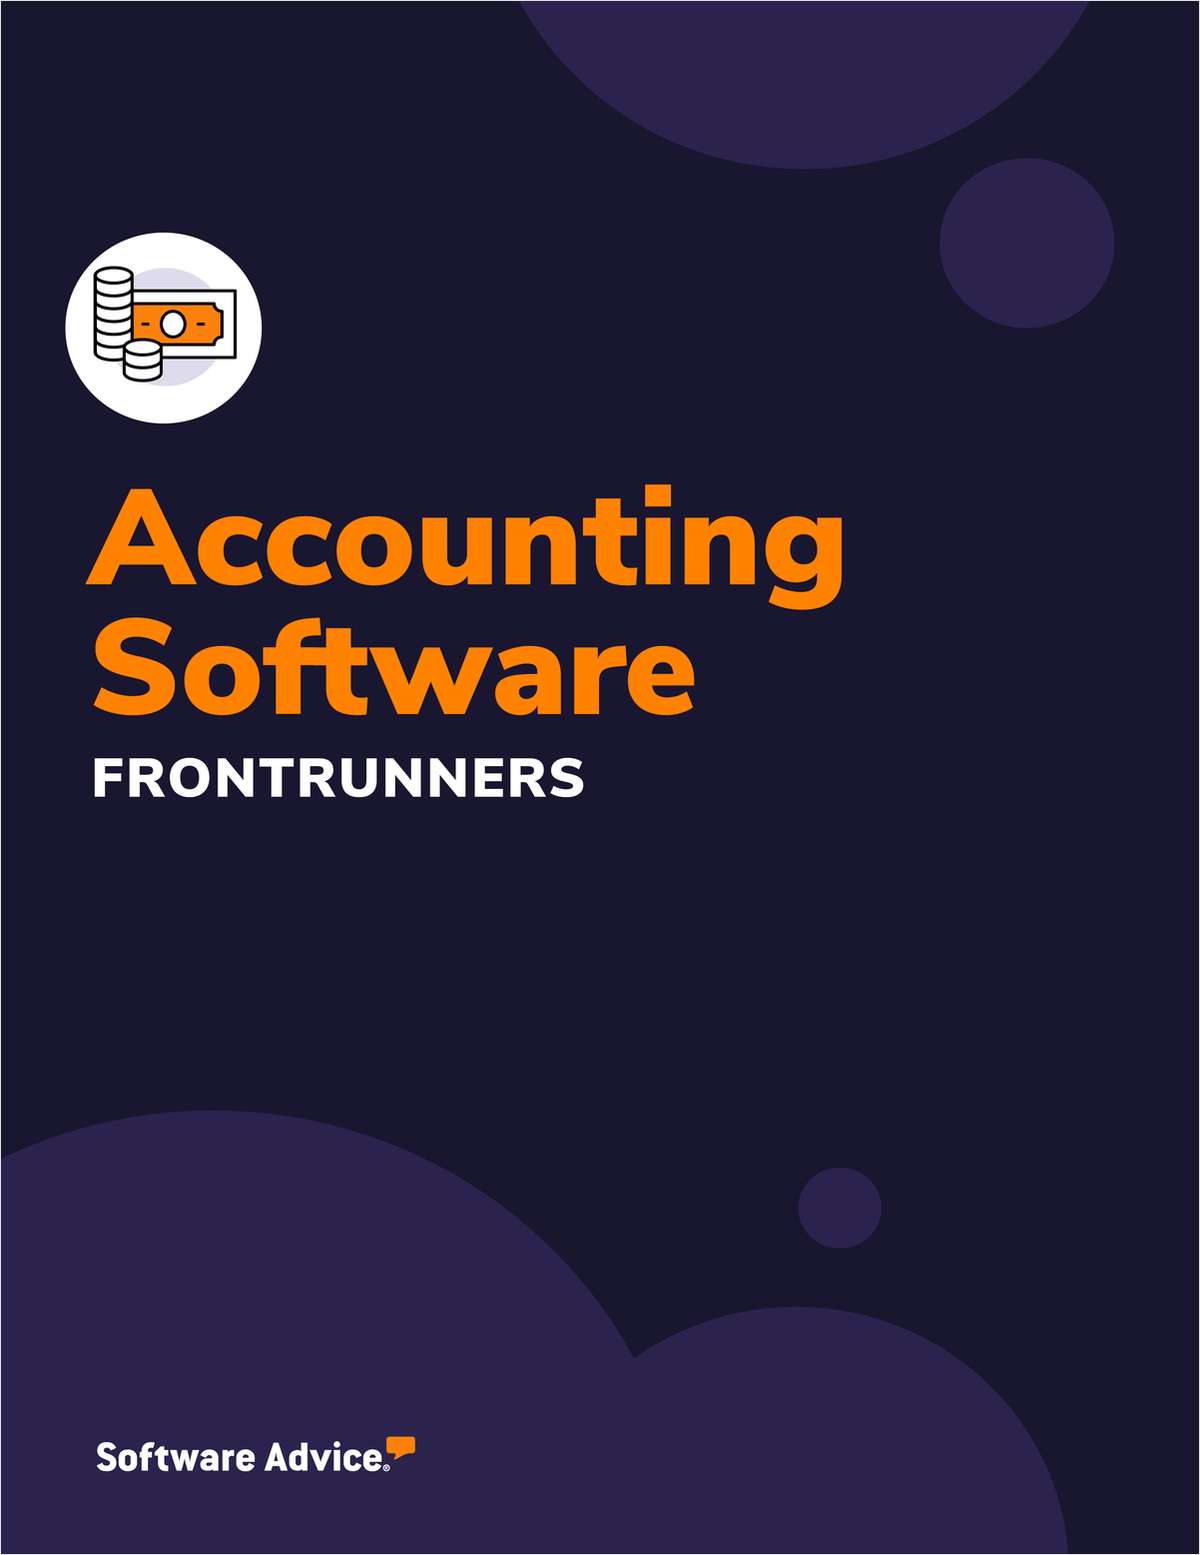 Top-Shelf Accounting Software in 2023